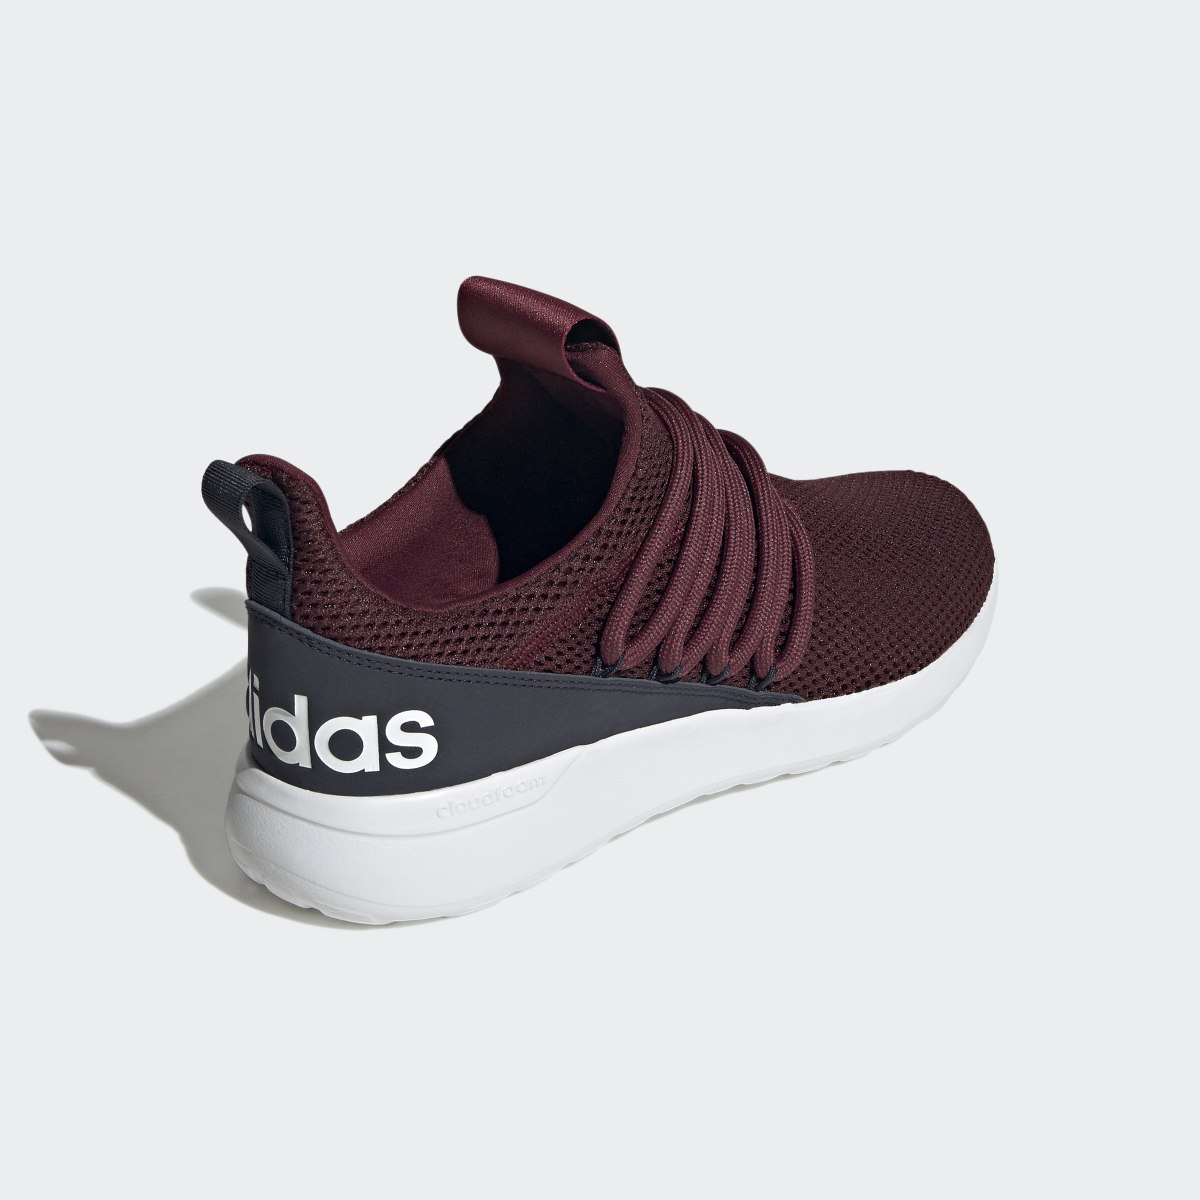 Adidas Lite Racer Adapt 3.0 Shoes. 6